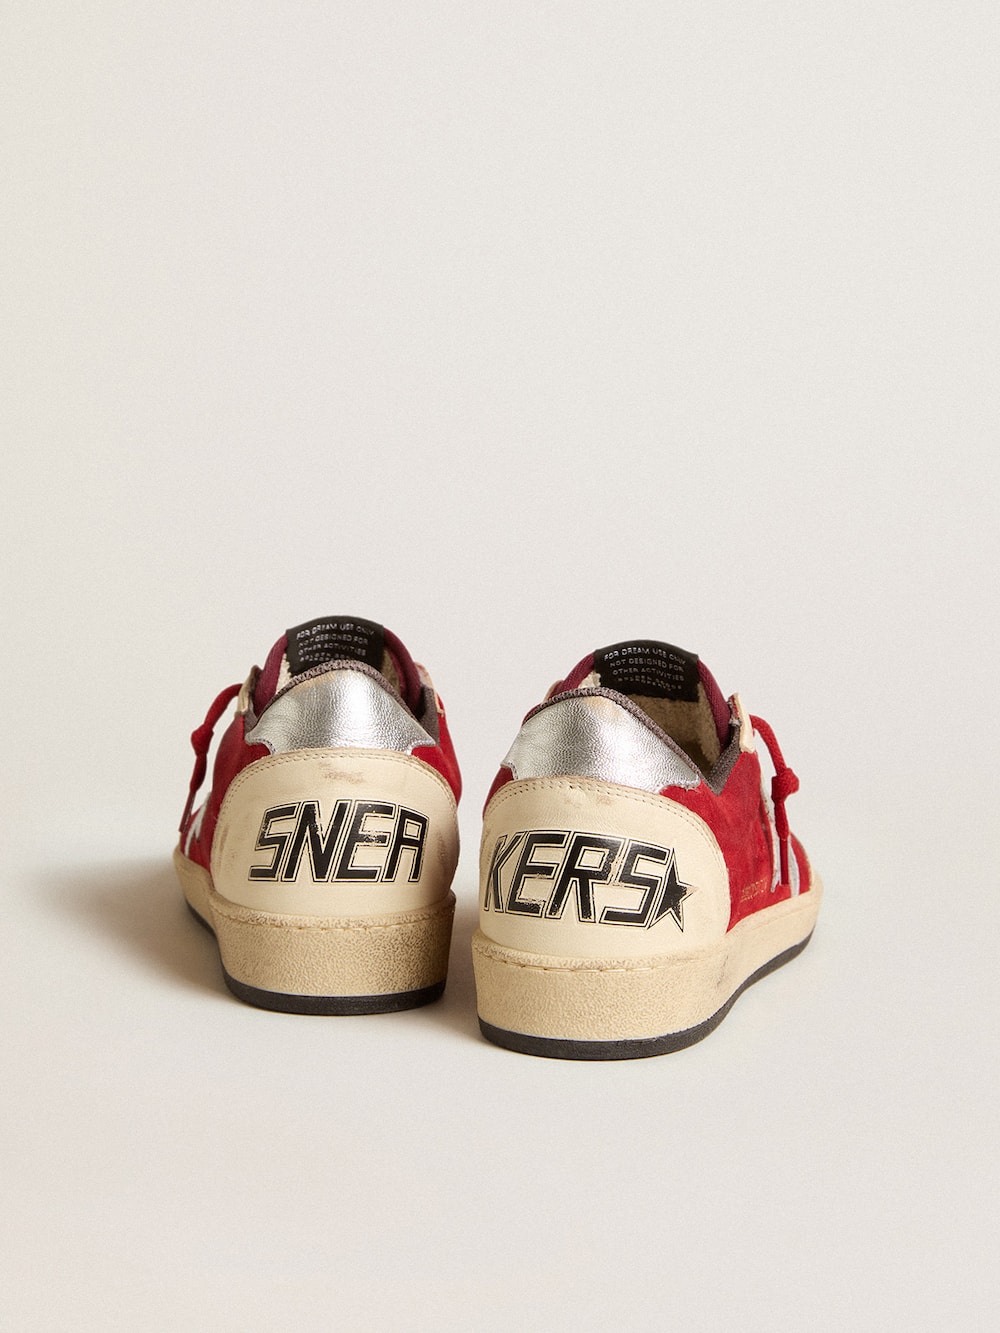 Golden Goose - Ball Star in burgundy suede with silver leather star and heel tab in 